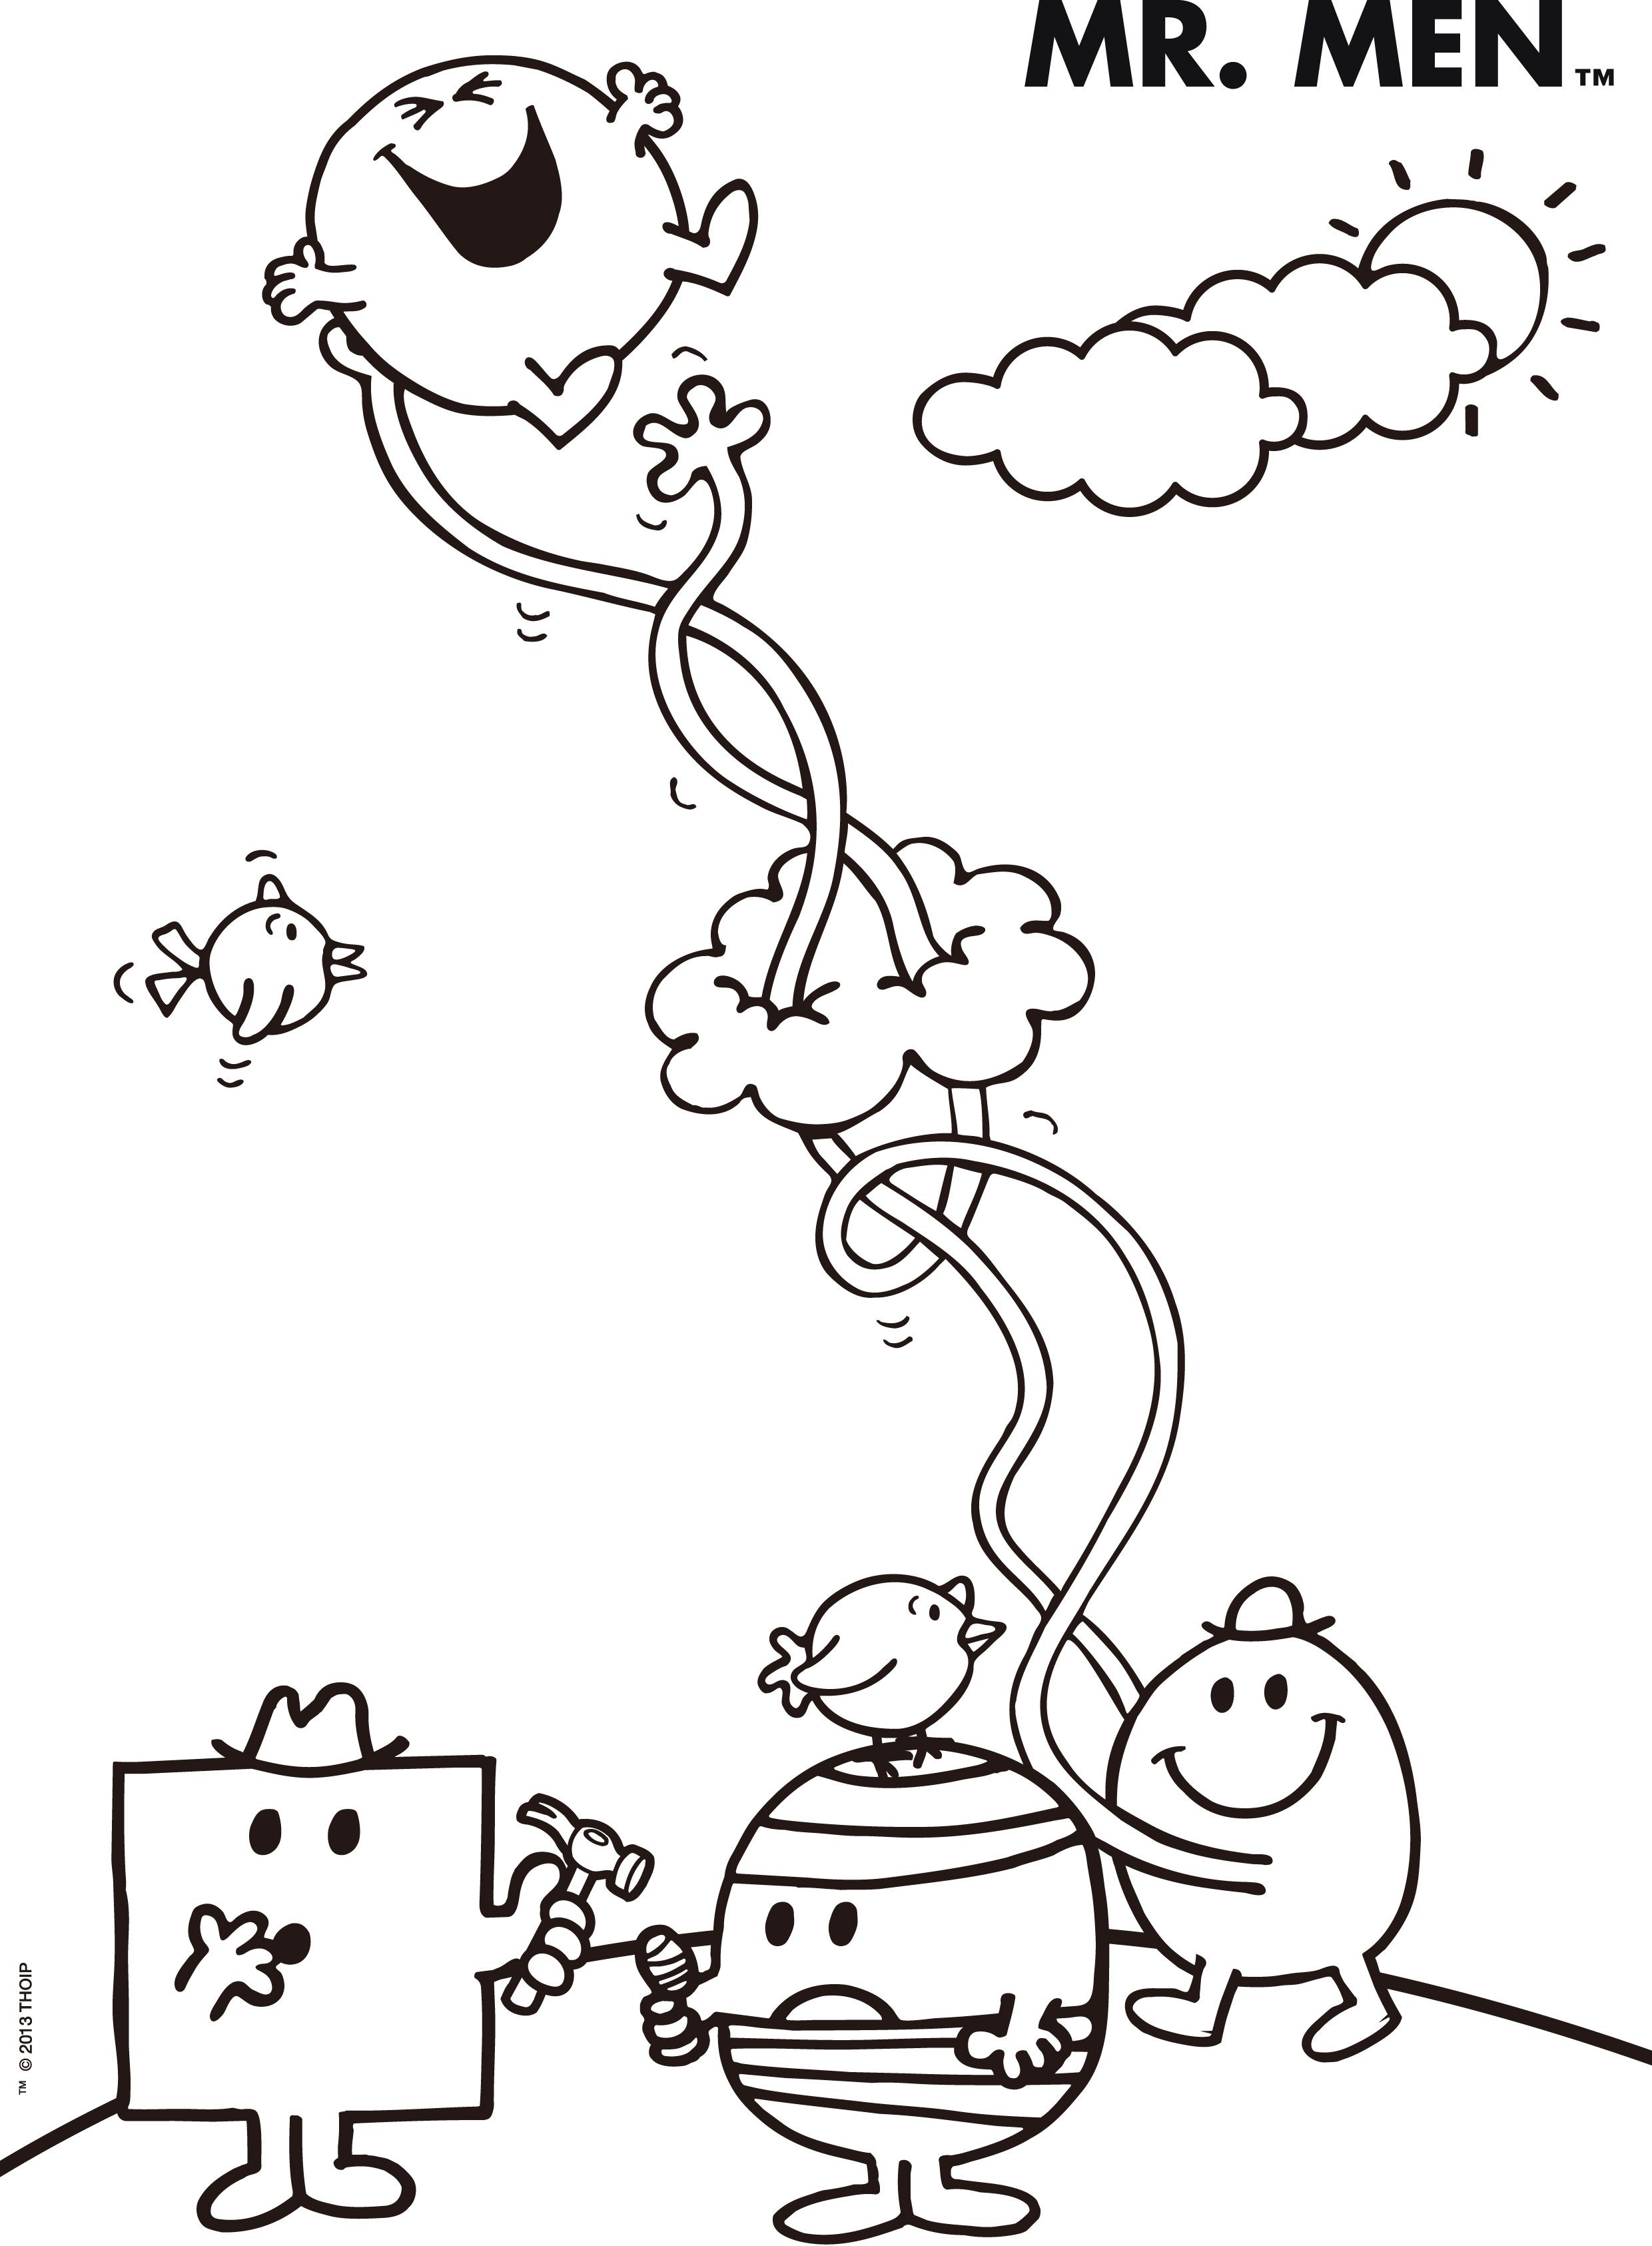 colouring mr men and miss sunshine activity - Clip Art Library